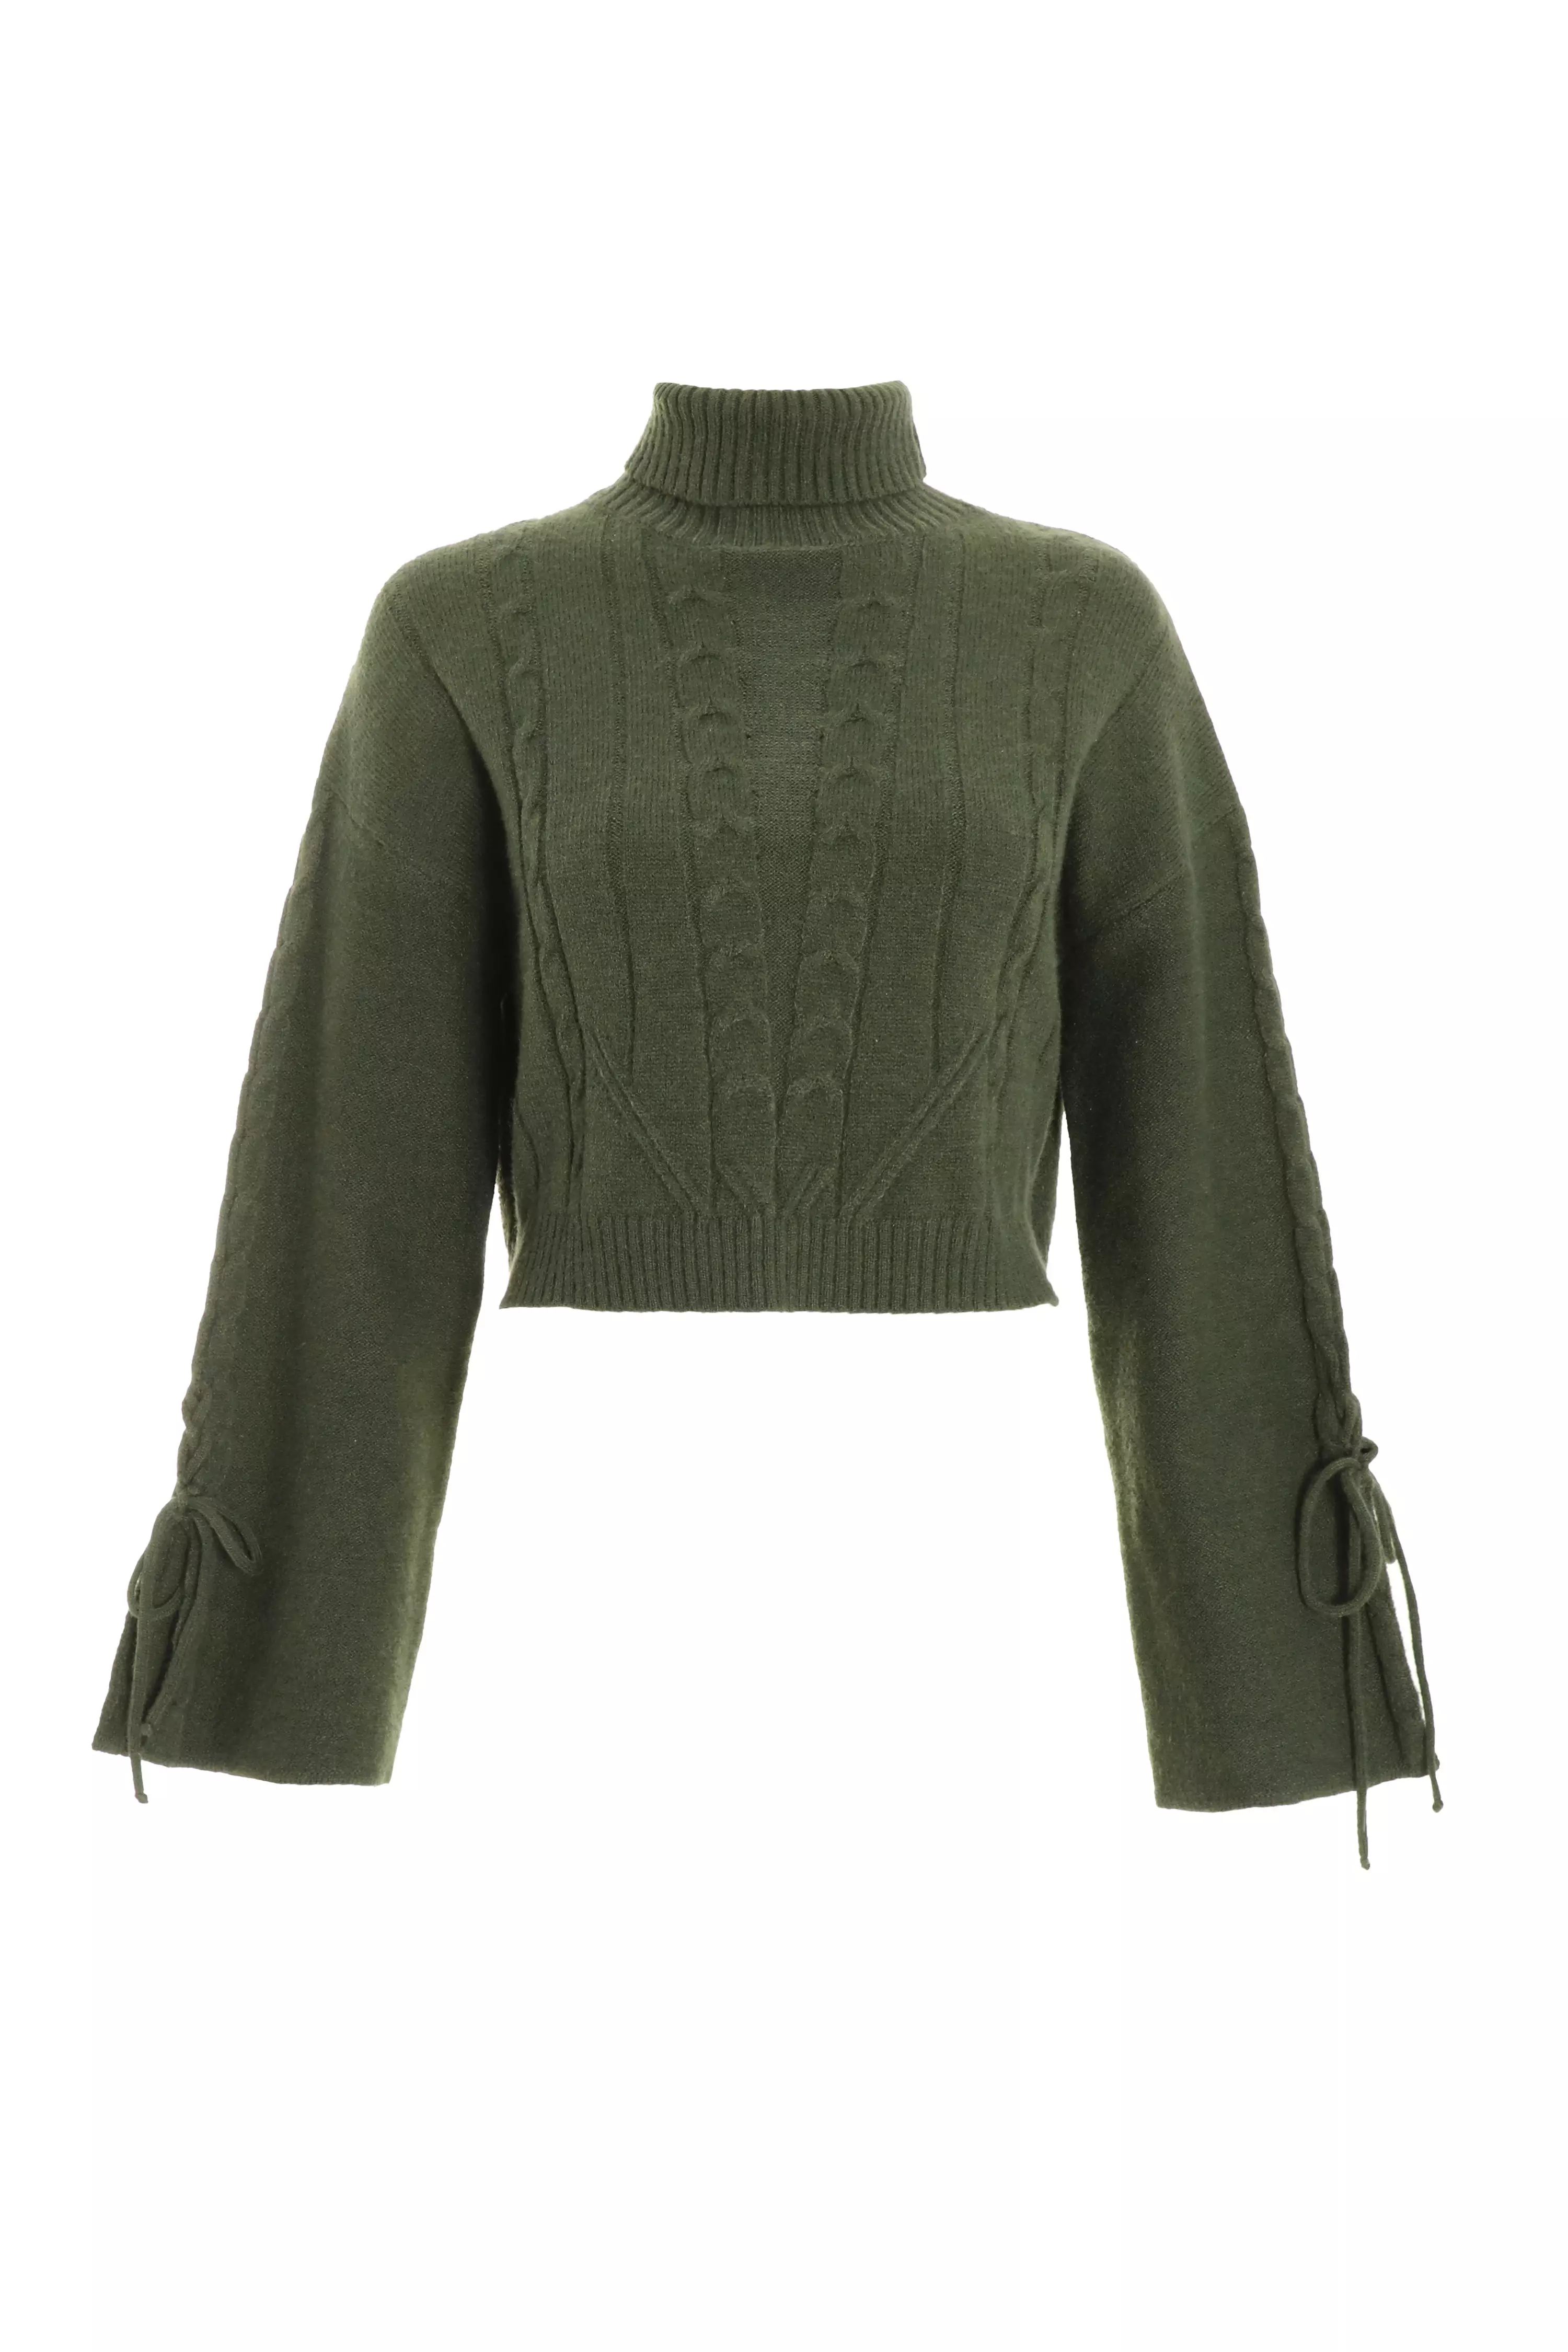 Khaki Knitted Lace Up Sleeve Jumper